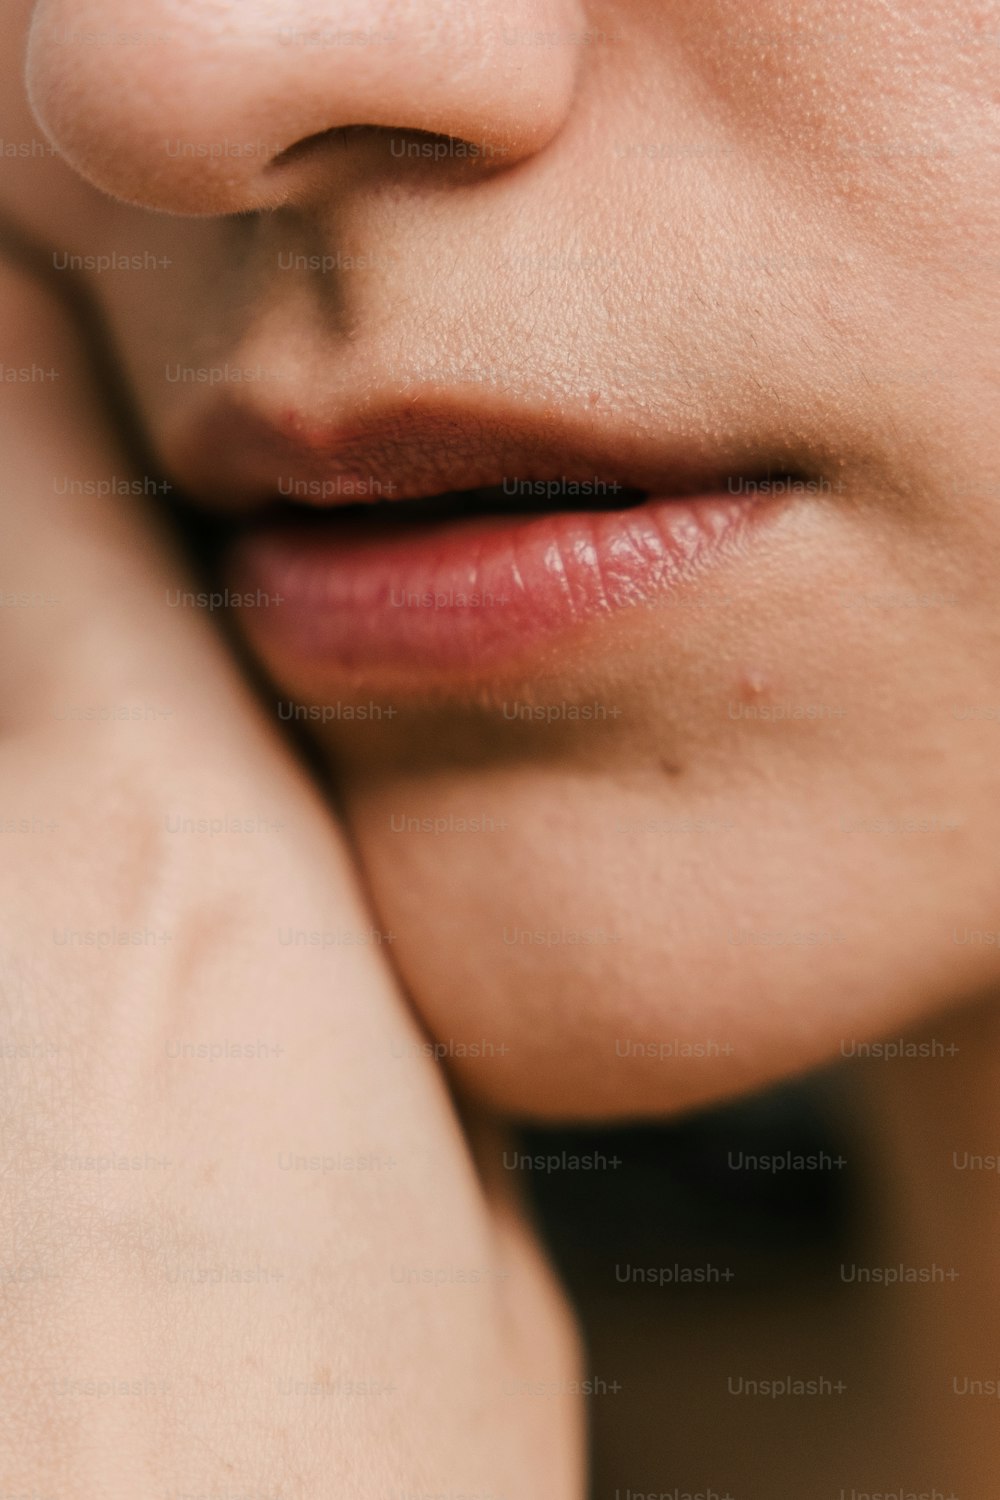 a close up of a woman's face with a ring on her finger